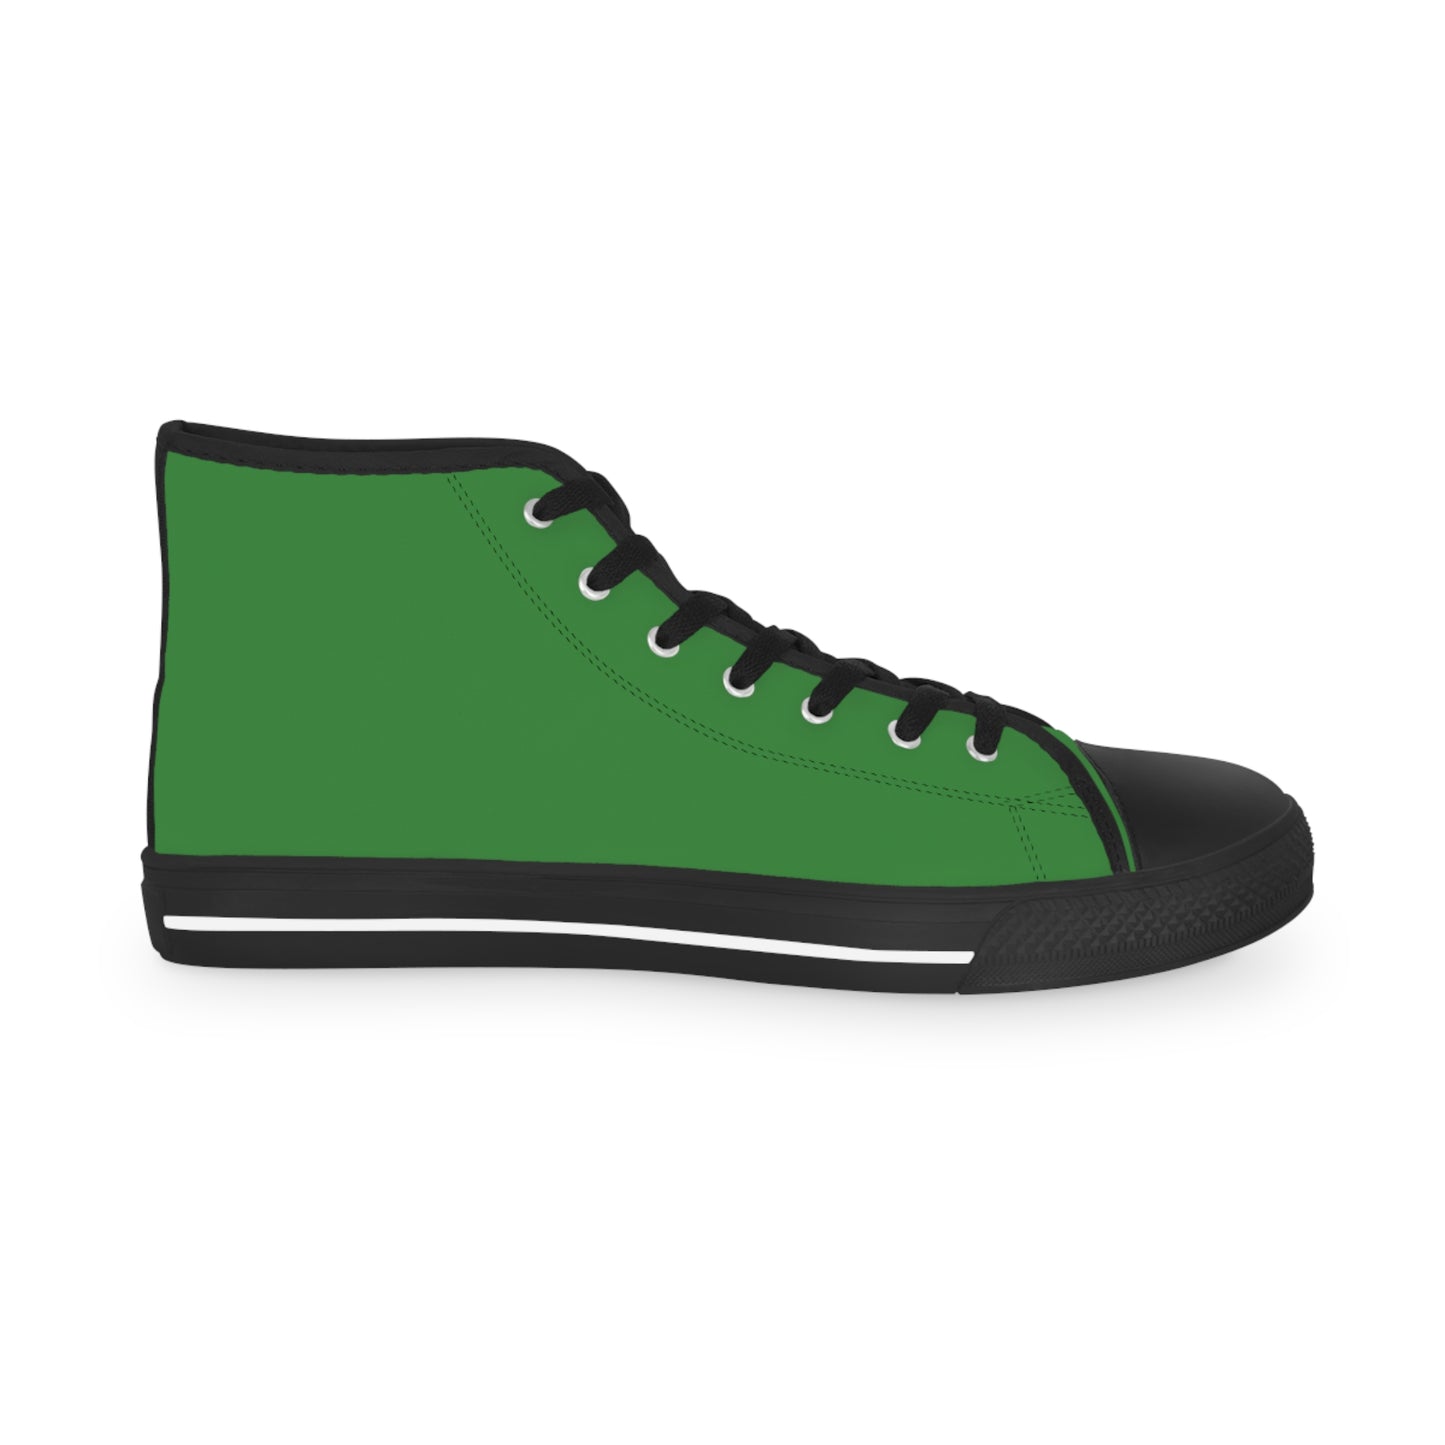 Men's High Top Sneakers - Green US 14 White sole